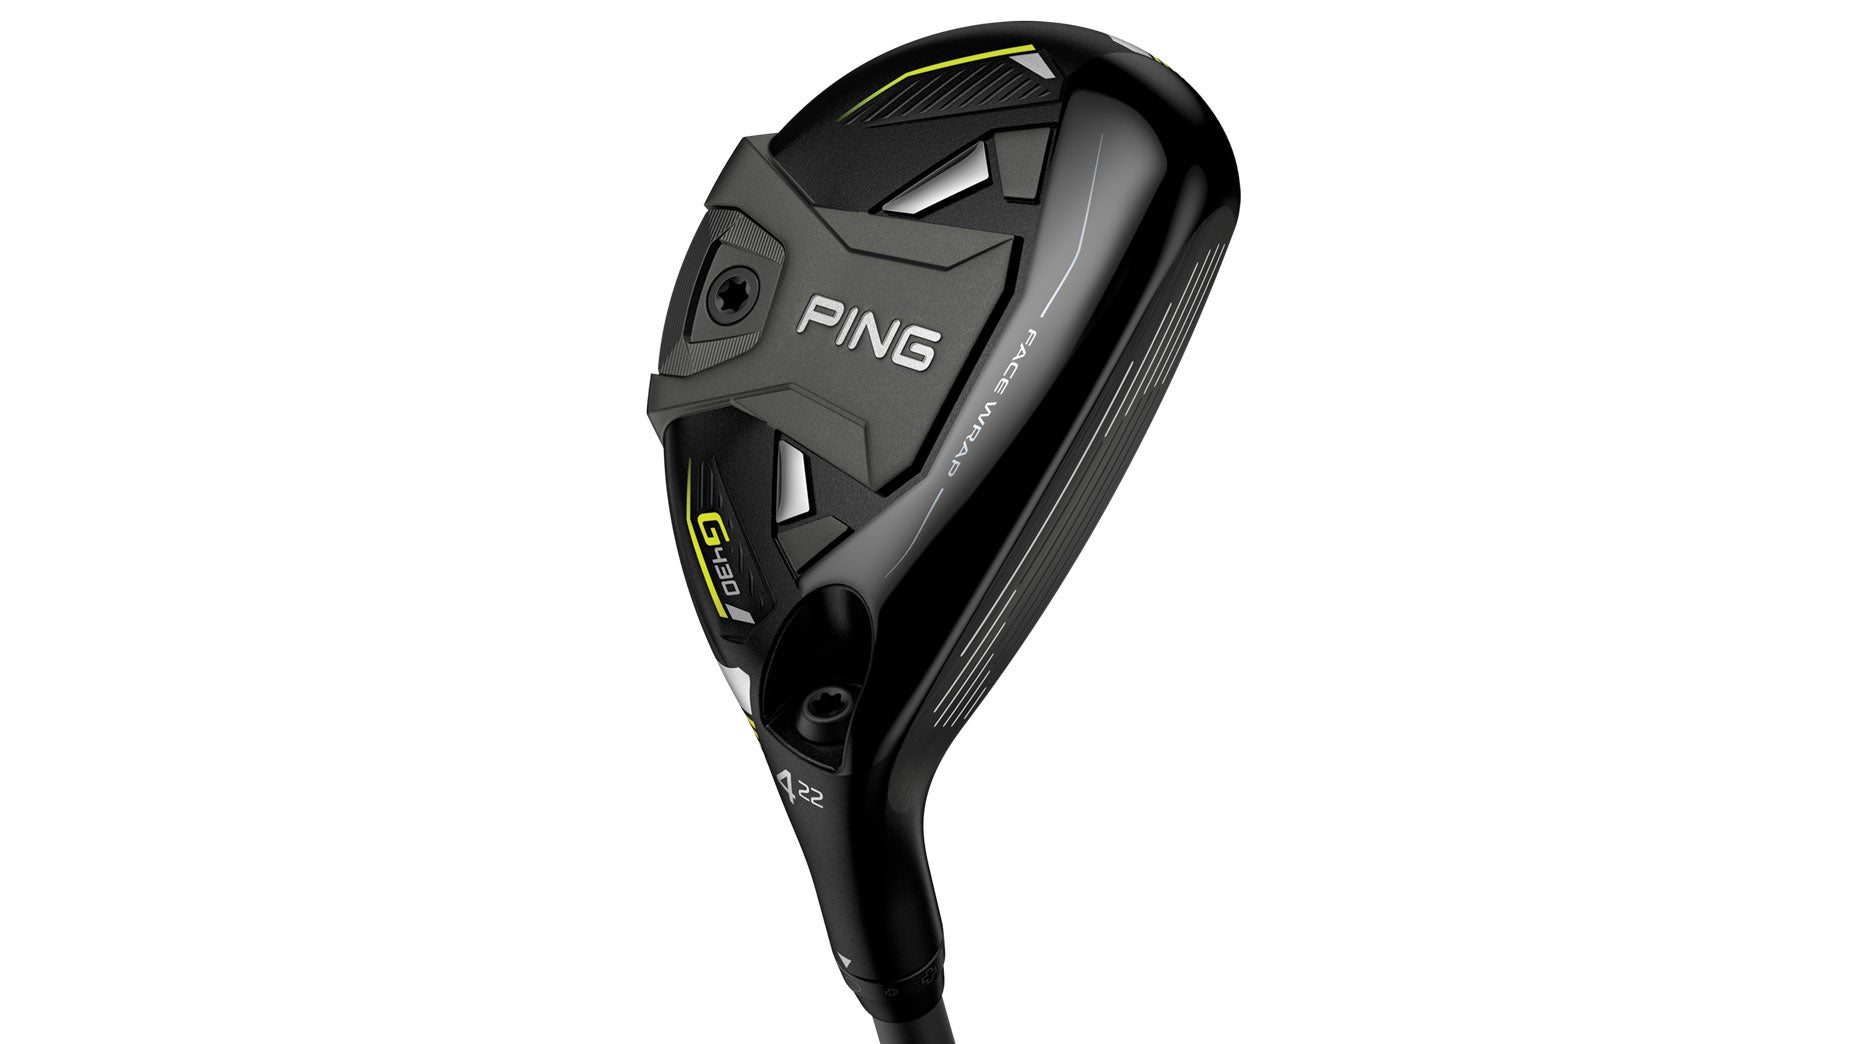 New Ping golf clubs for 2023 (drivers, irons, woods, hybrids